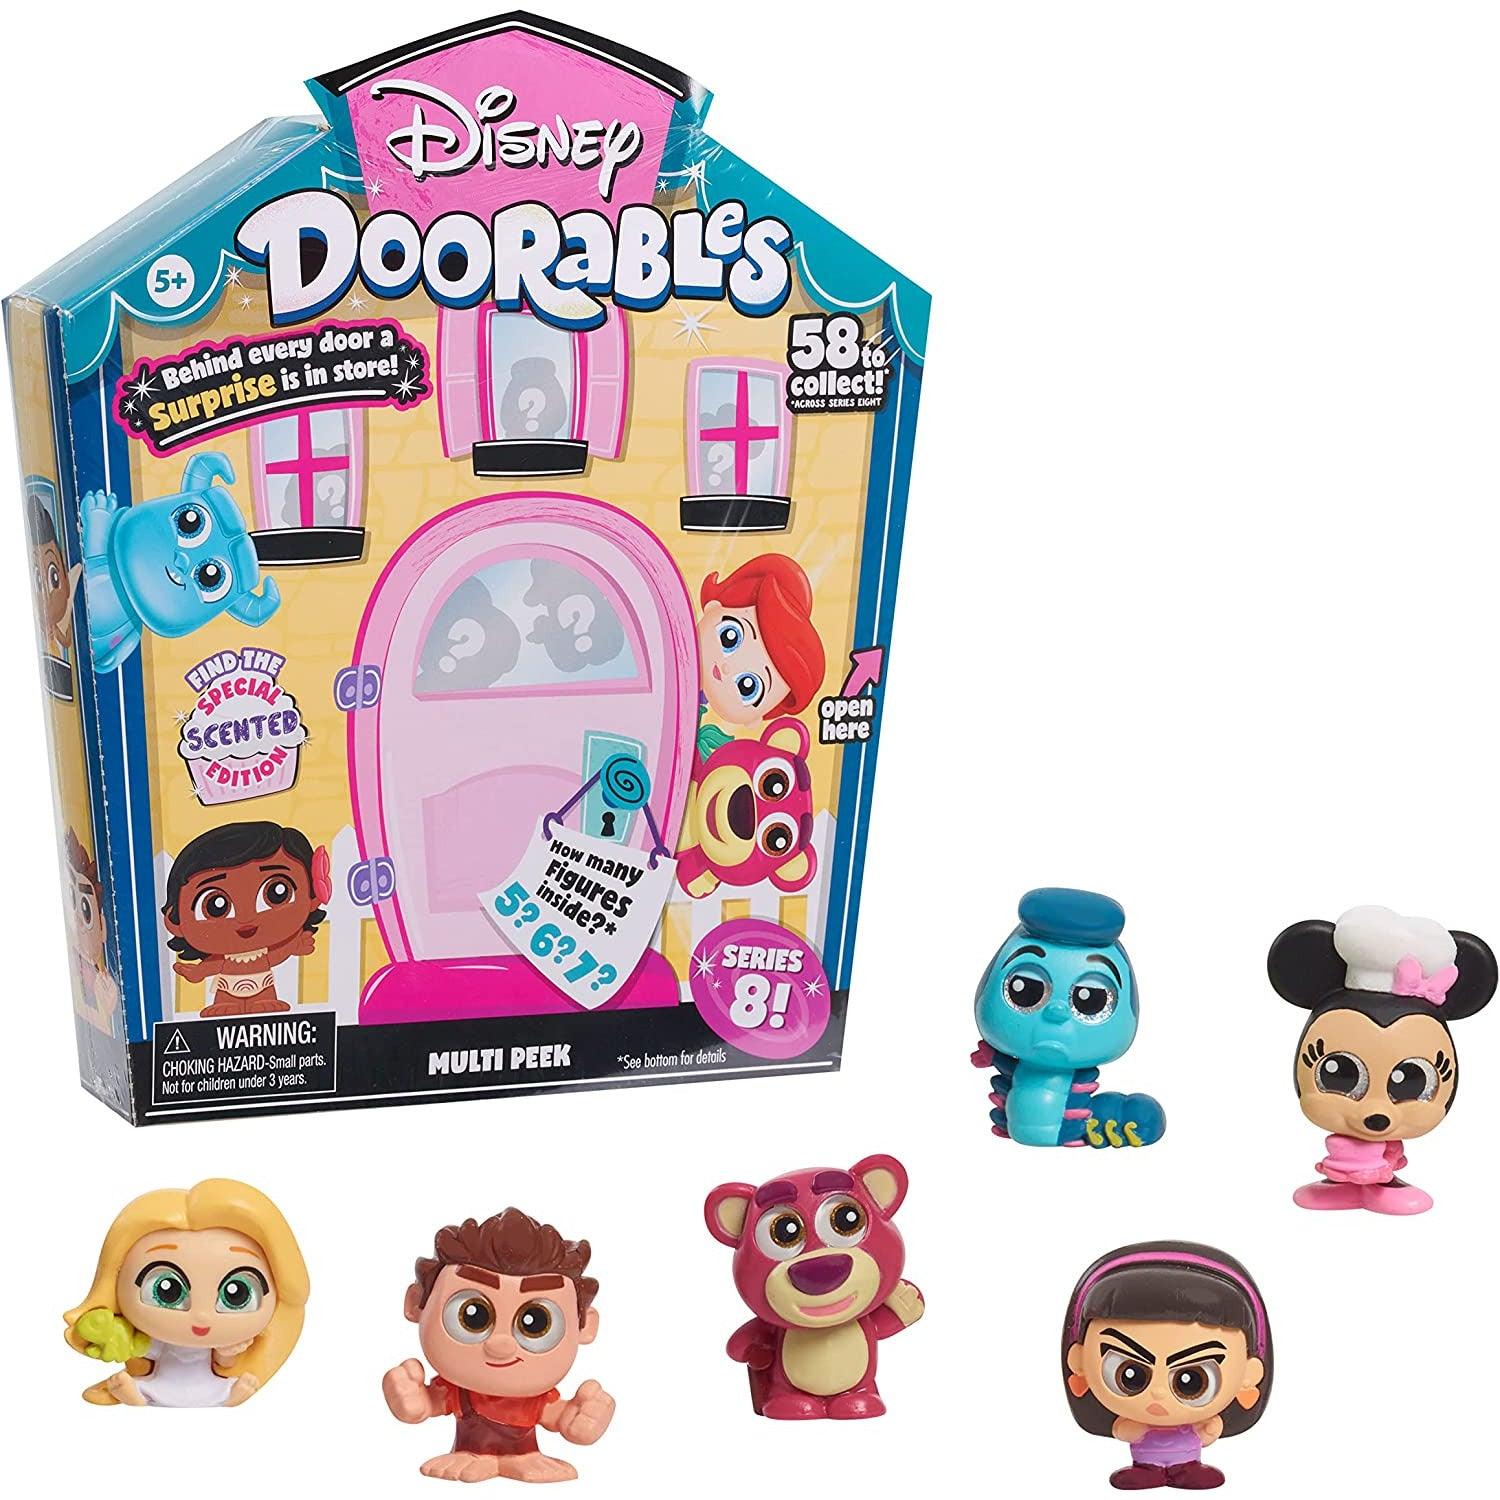 Disney Doorables Multi Peek, Easter Basket Stuffers, Series 8 (Styles May Vary) - BumbleToys - 2-4 Years, 5-7 Years, collectible, collectors, Disney, Lilo & Stitch, OXE, Pre-Order